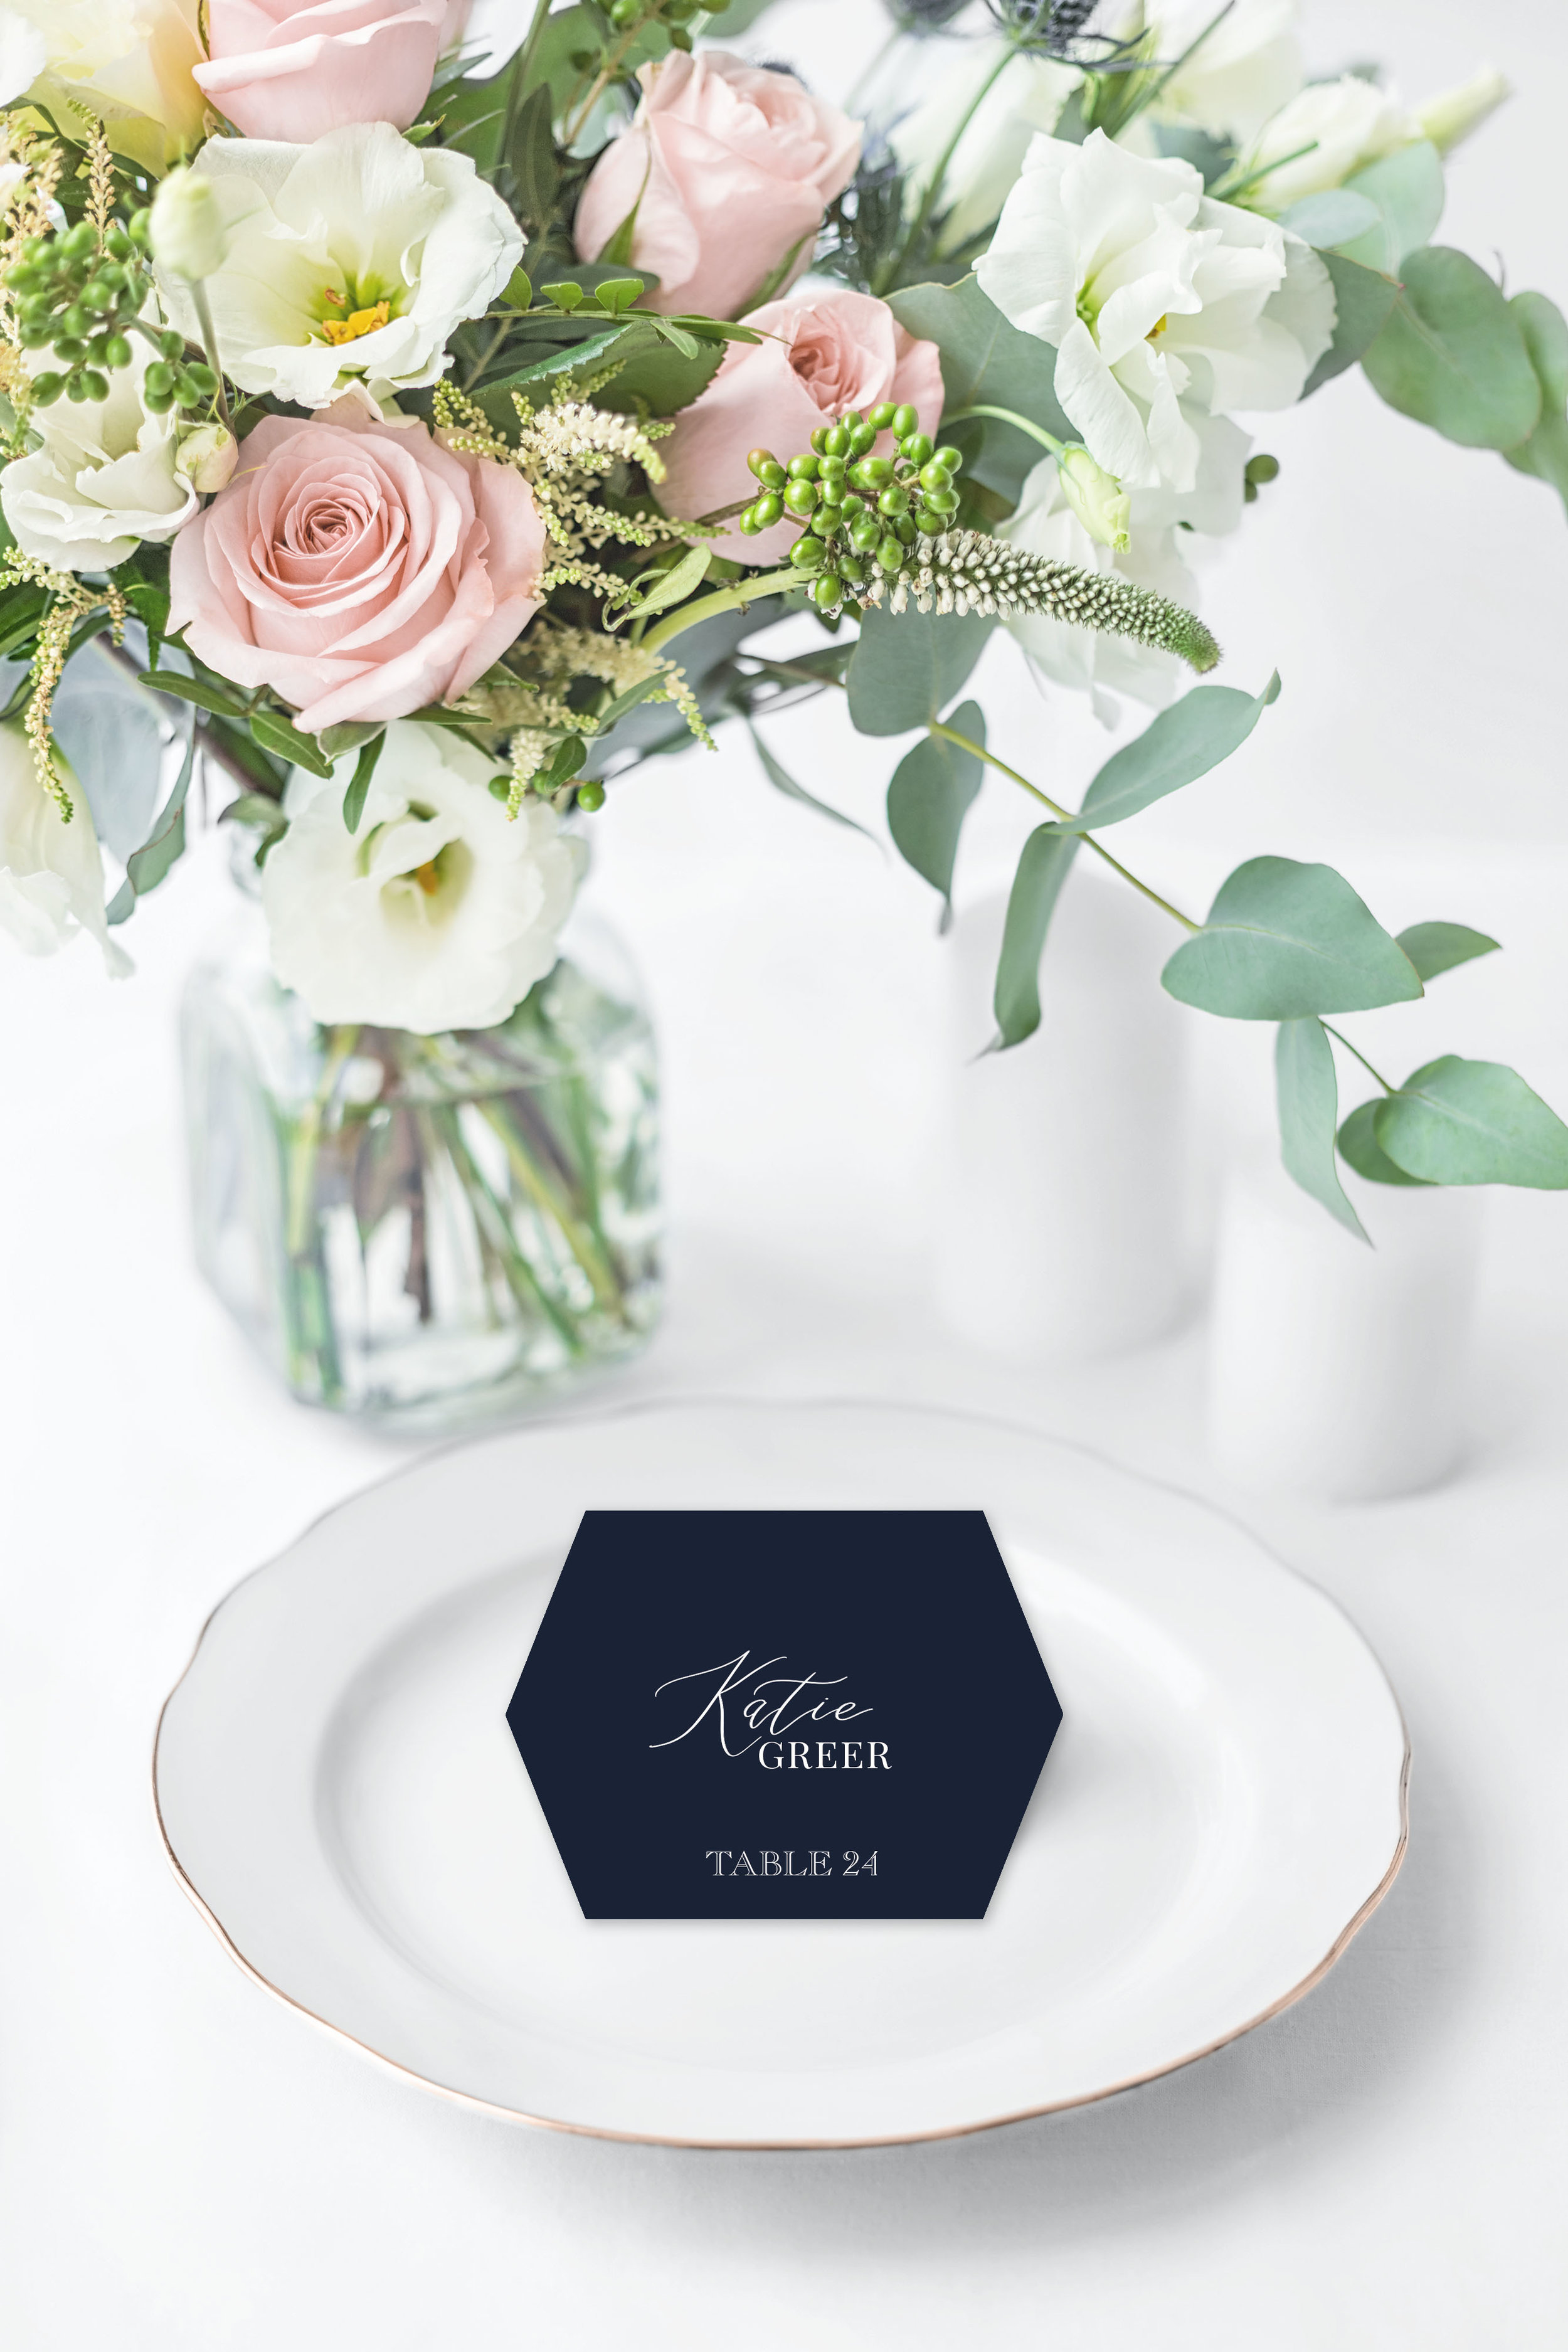 WHITE INK ON NAVY HEXAGON PLACE CARD.jpg